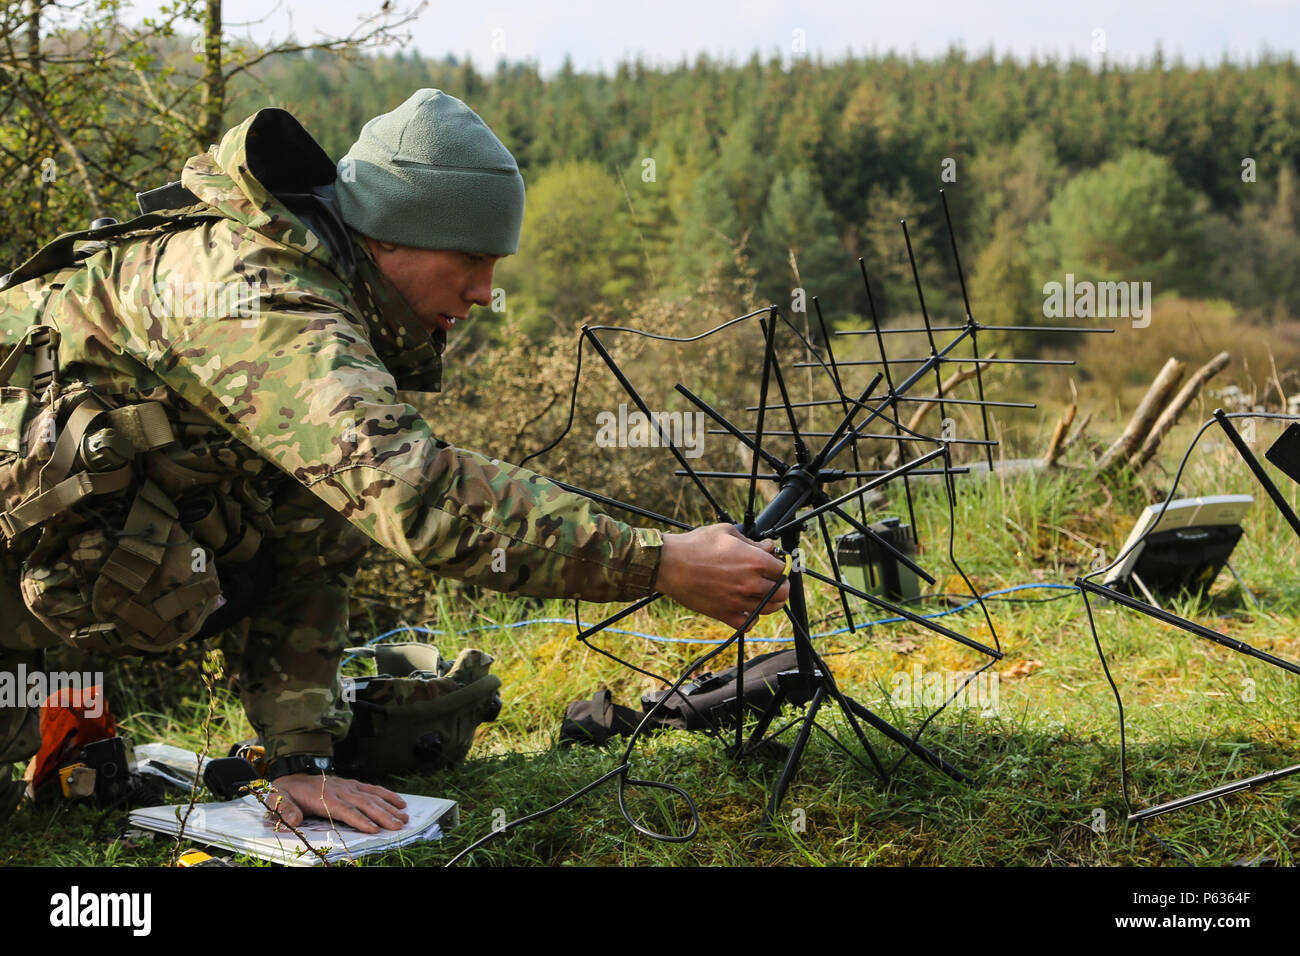 A U.S. Soldier of the 173rd Airborne Brigade adjusts a portable antenna while conducting tactical operations during exercise Saber Junction 16 at the U.S. Army’s Joint Multinational Readiness Center (JMRC) in Hohenfels, Germany, April 14, 2016. Saber Junction 16 is the U.S. Army Europe’s 173rd Airborne Brigade’s combat training center certification exercise, taking place at the JMRC in Hohenfels, Germany, Mar. 31-Apr. 24, 2016.  The exercise is designed to evaluate the readiness of the Army’s Europe-based combat brigades to conduct unified land operations and promote interoperability in a join Stock Photo